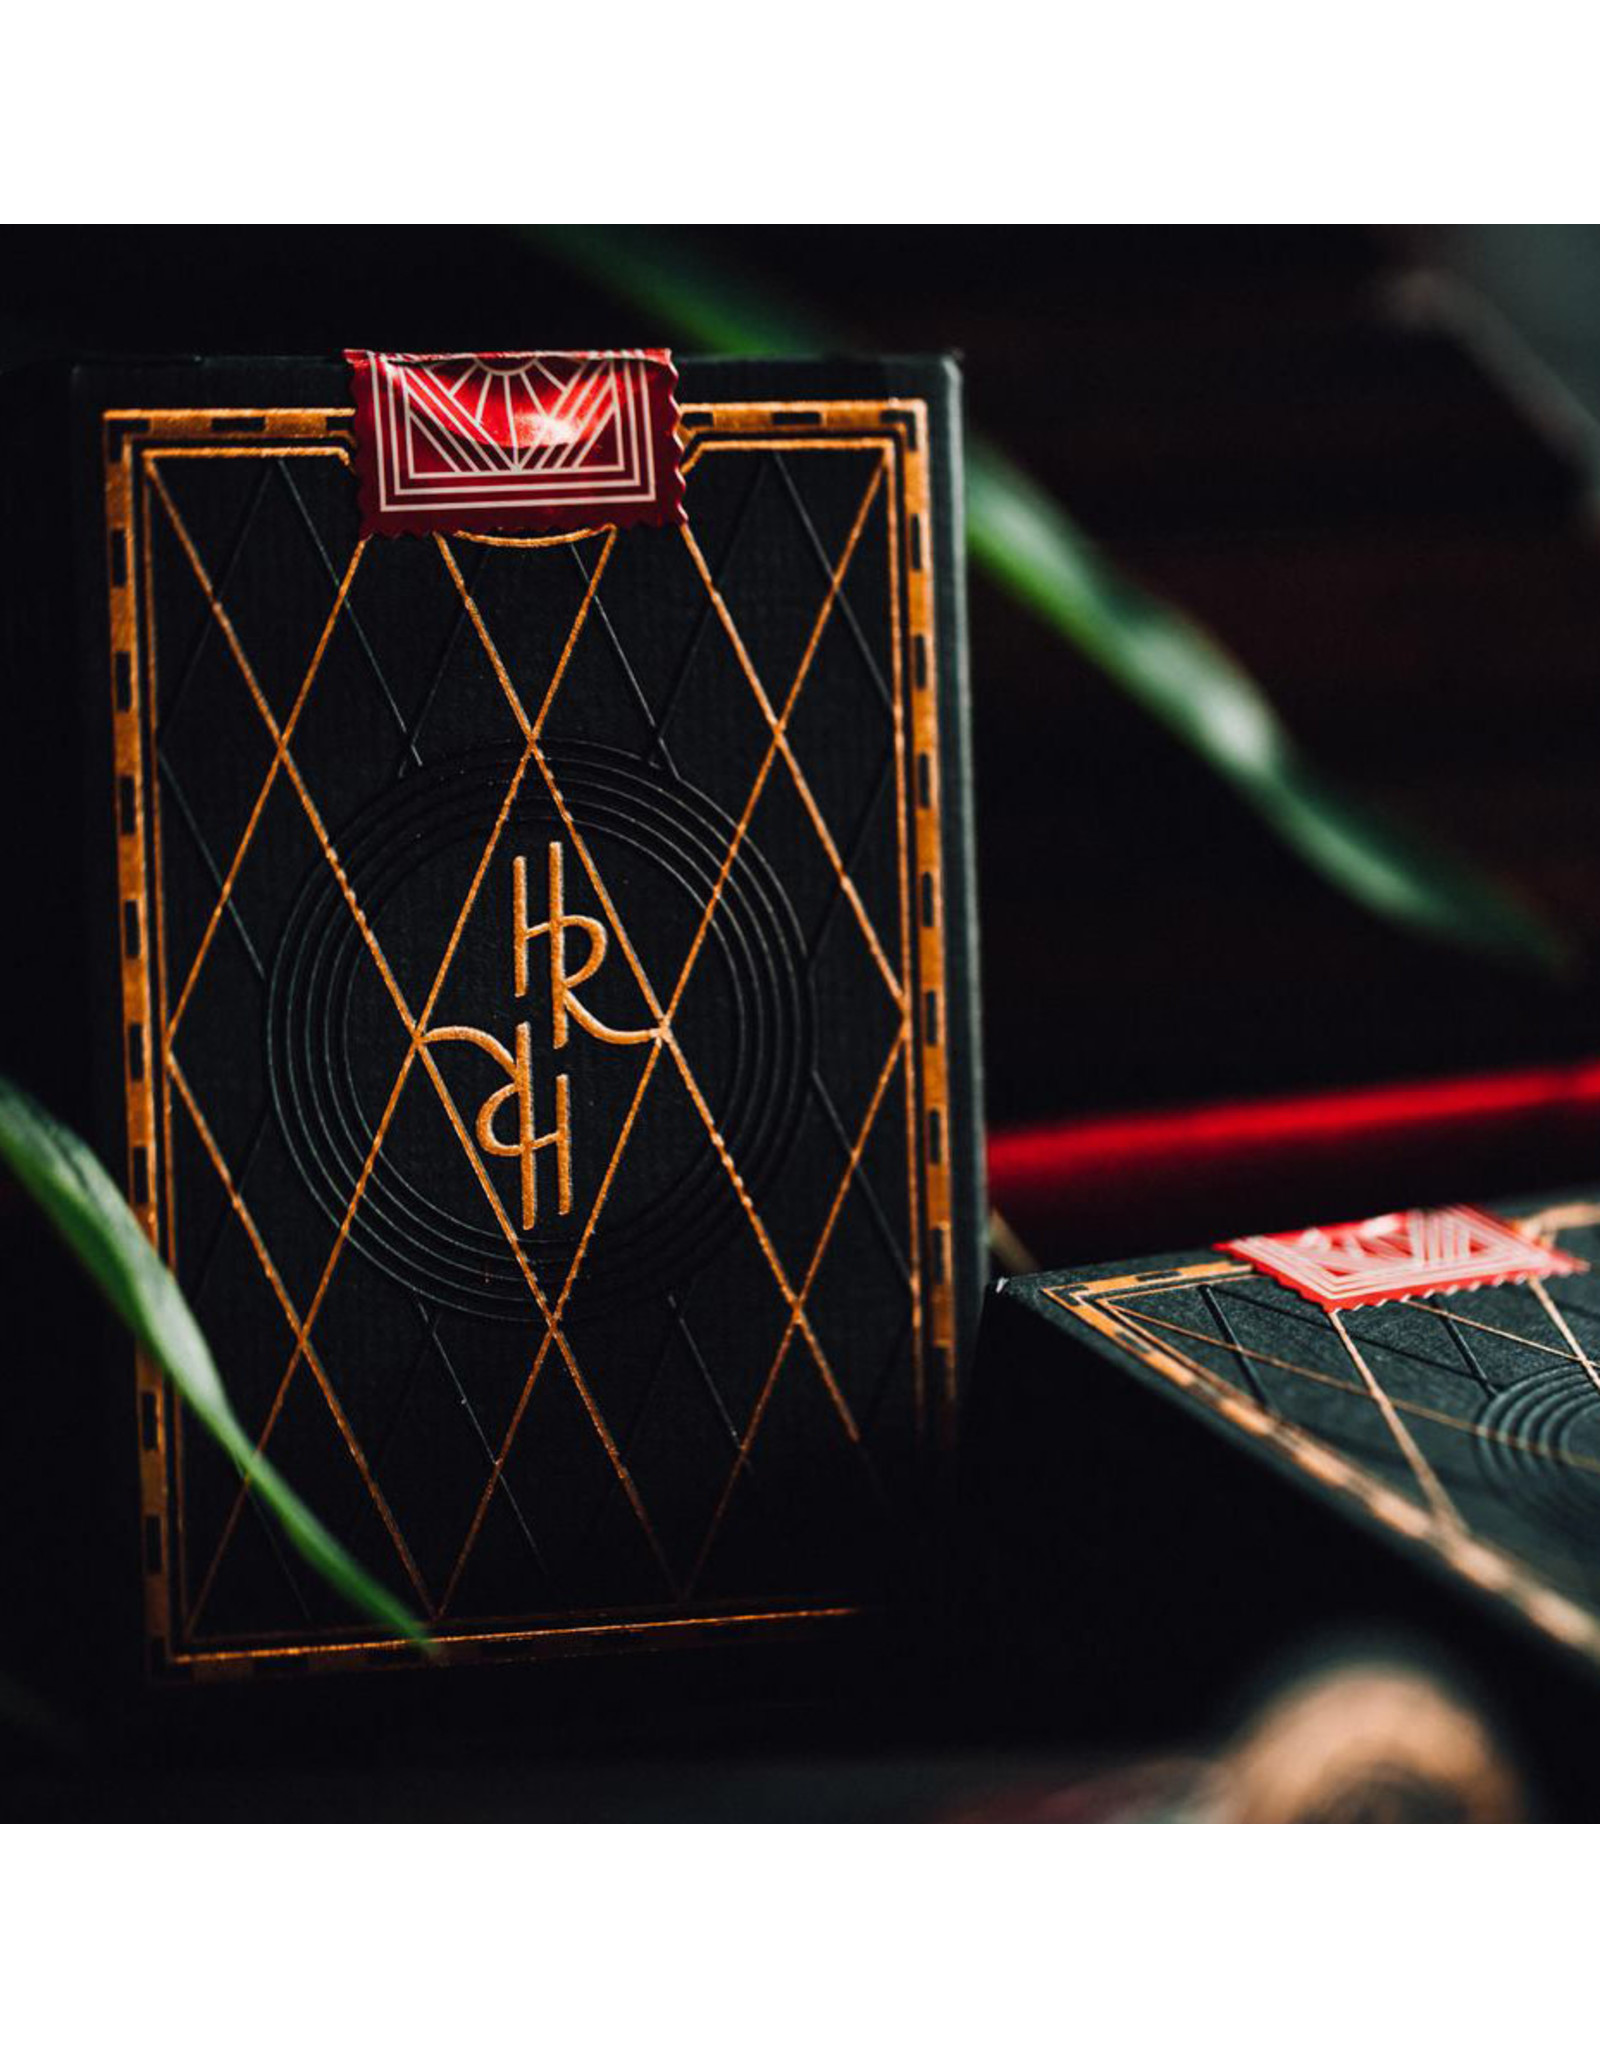 Theory 11 Hollywood Roosevelt Playing Cards